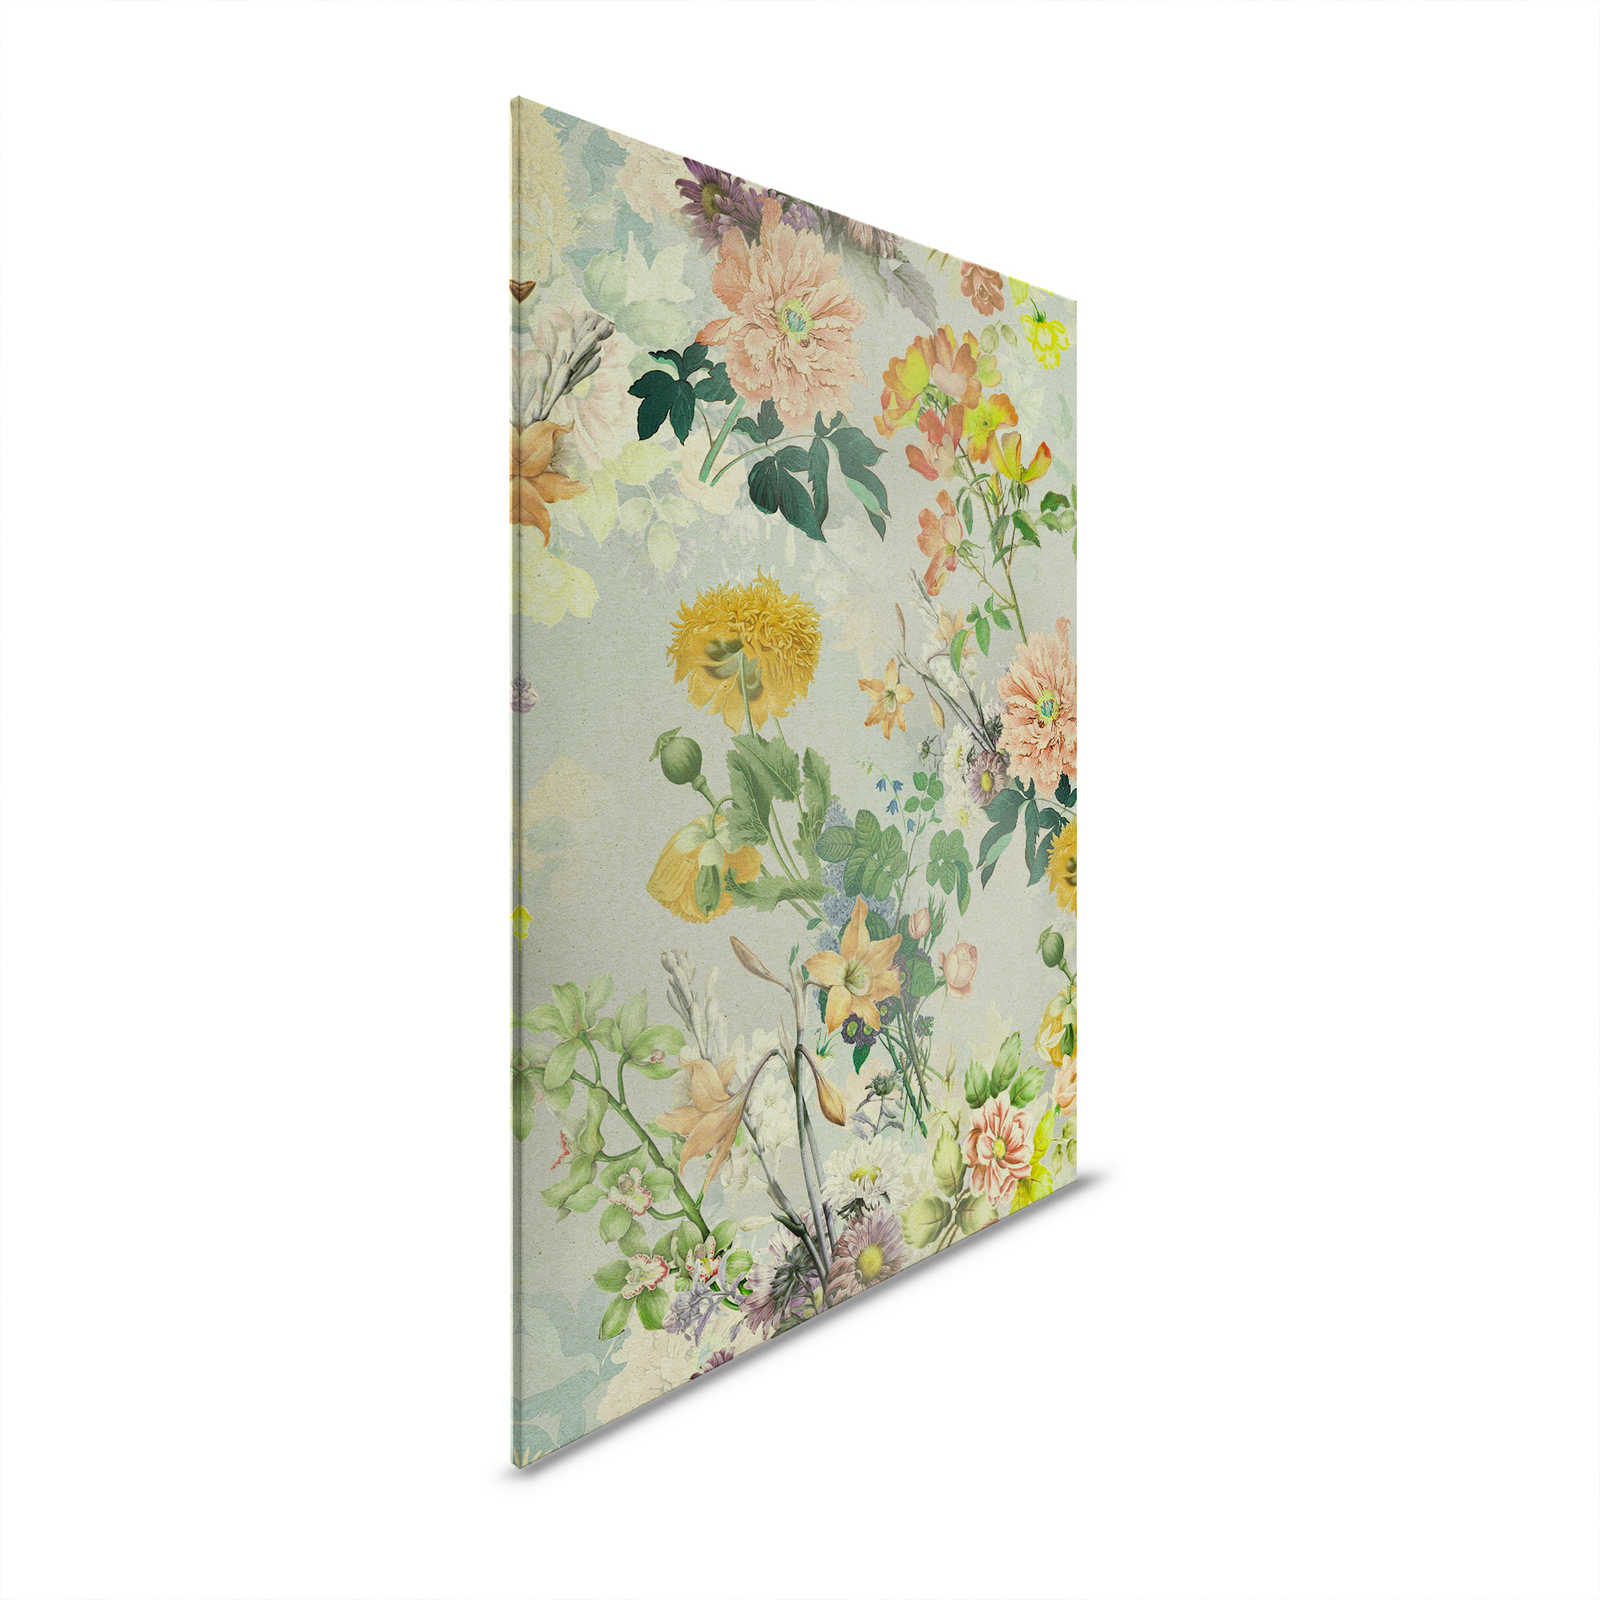 Amelies Home 2 - Flowers Canvas painting colourful blossoms in country style - 1,20 m x 0,80 m
